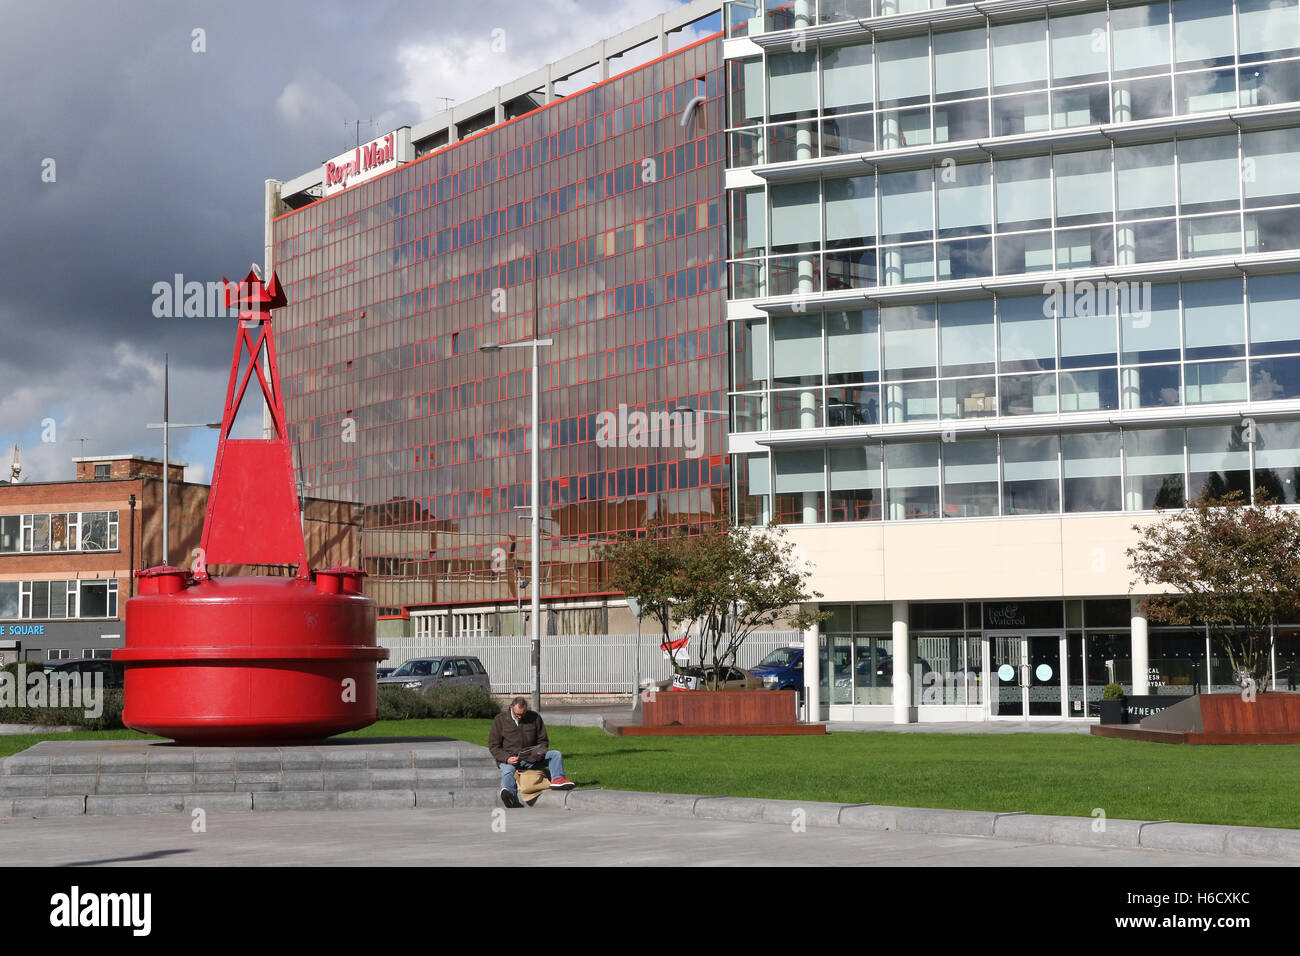 City marine heritage and art - Navigation buoy aid and public space at Donegall Quay, Belfast Stock Photo